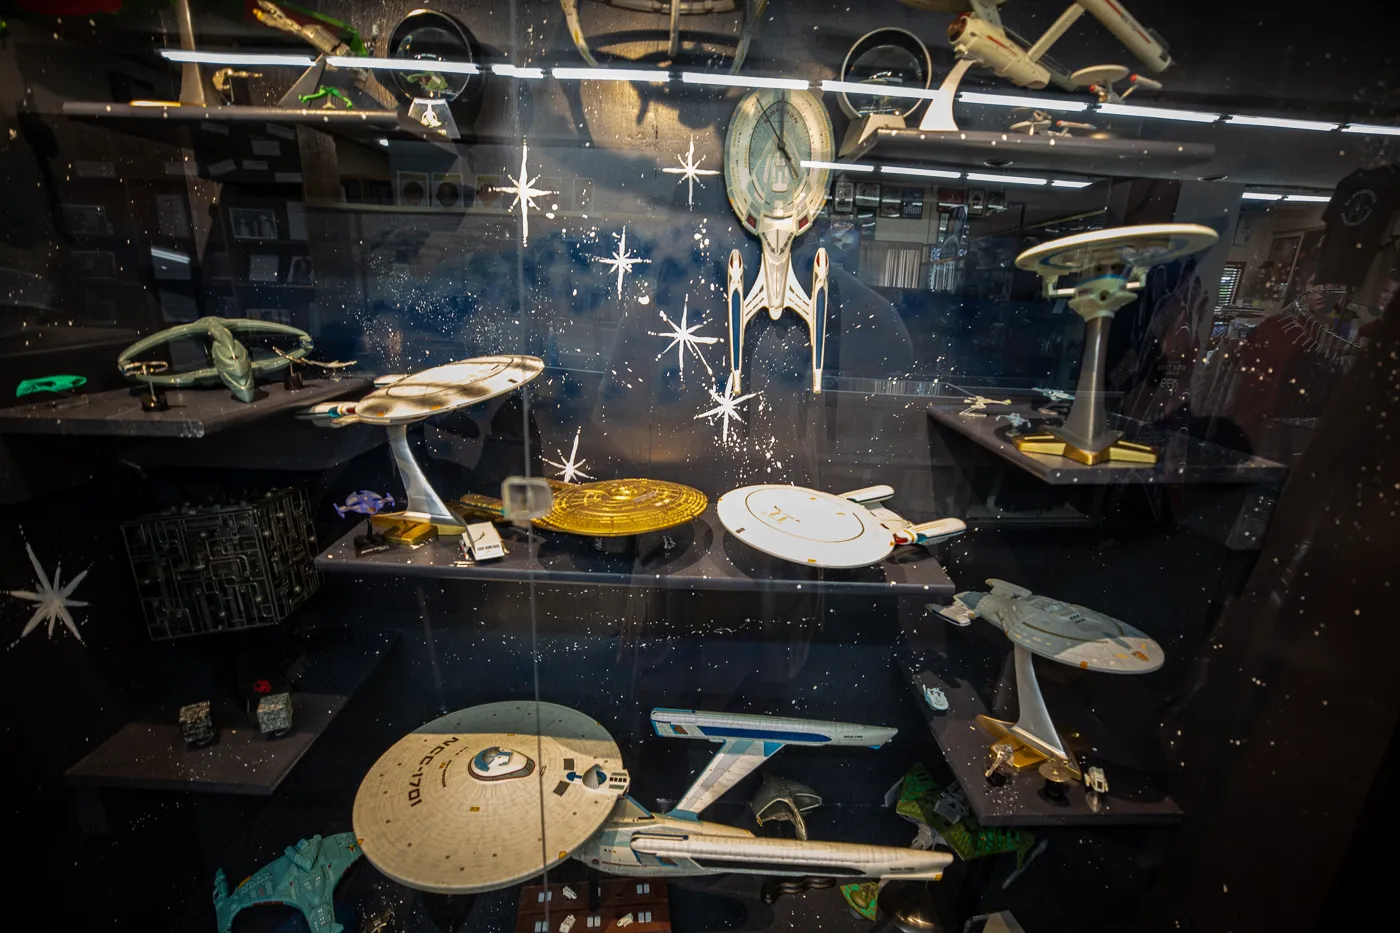 Models of the USS Enterprise at the Voyage Home History Center in Riverside Iowa. A Star Trek Museum in the future birthplace of Captain James T. Kirk of Star Trek fame.